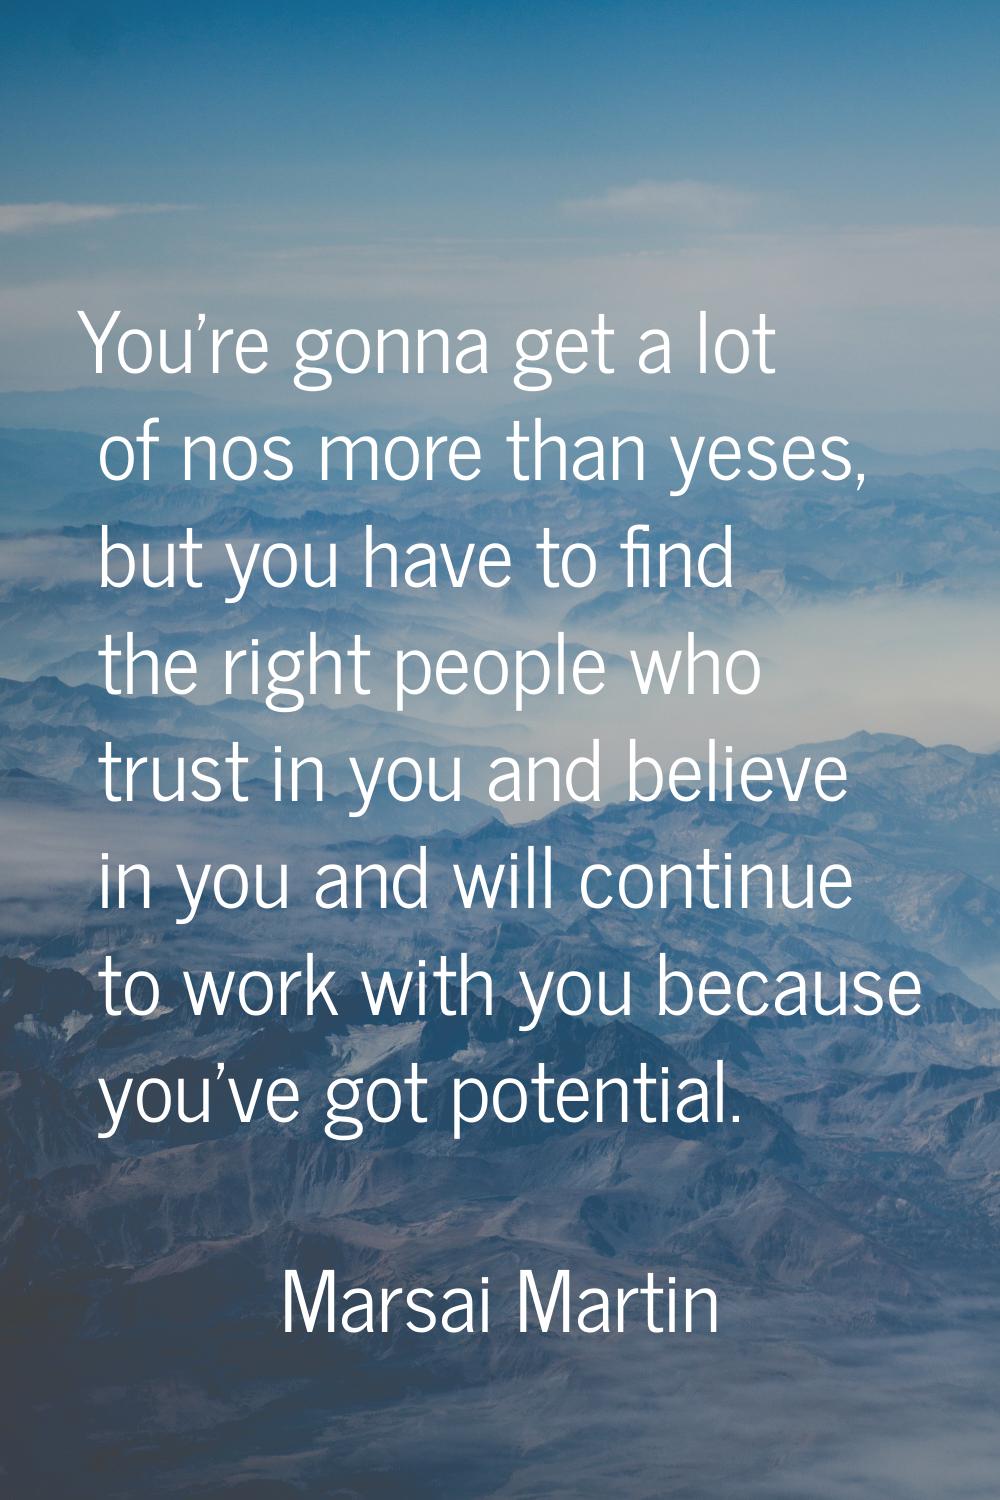 You're gonna get a lot of nos more than yeses, but you have to find the right people who trust in y